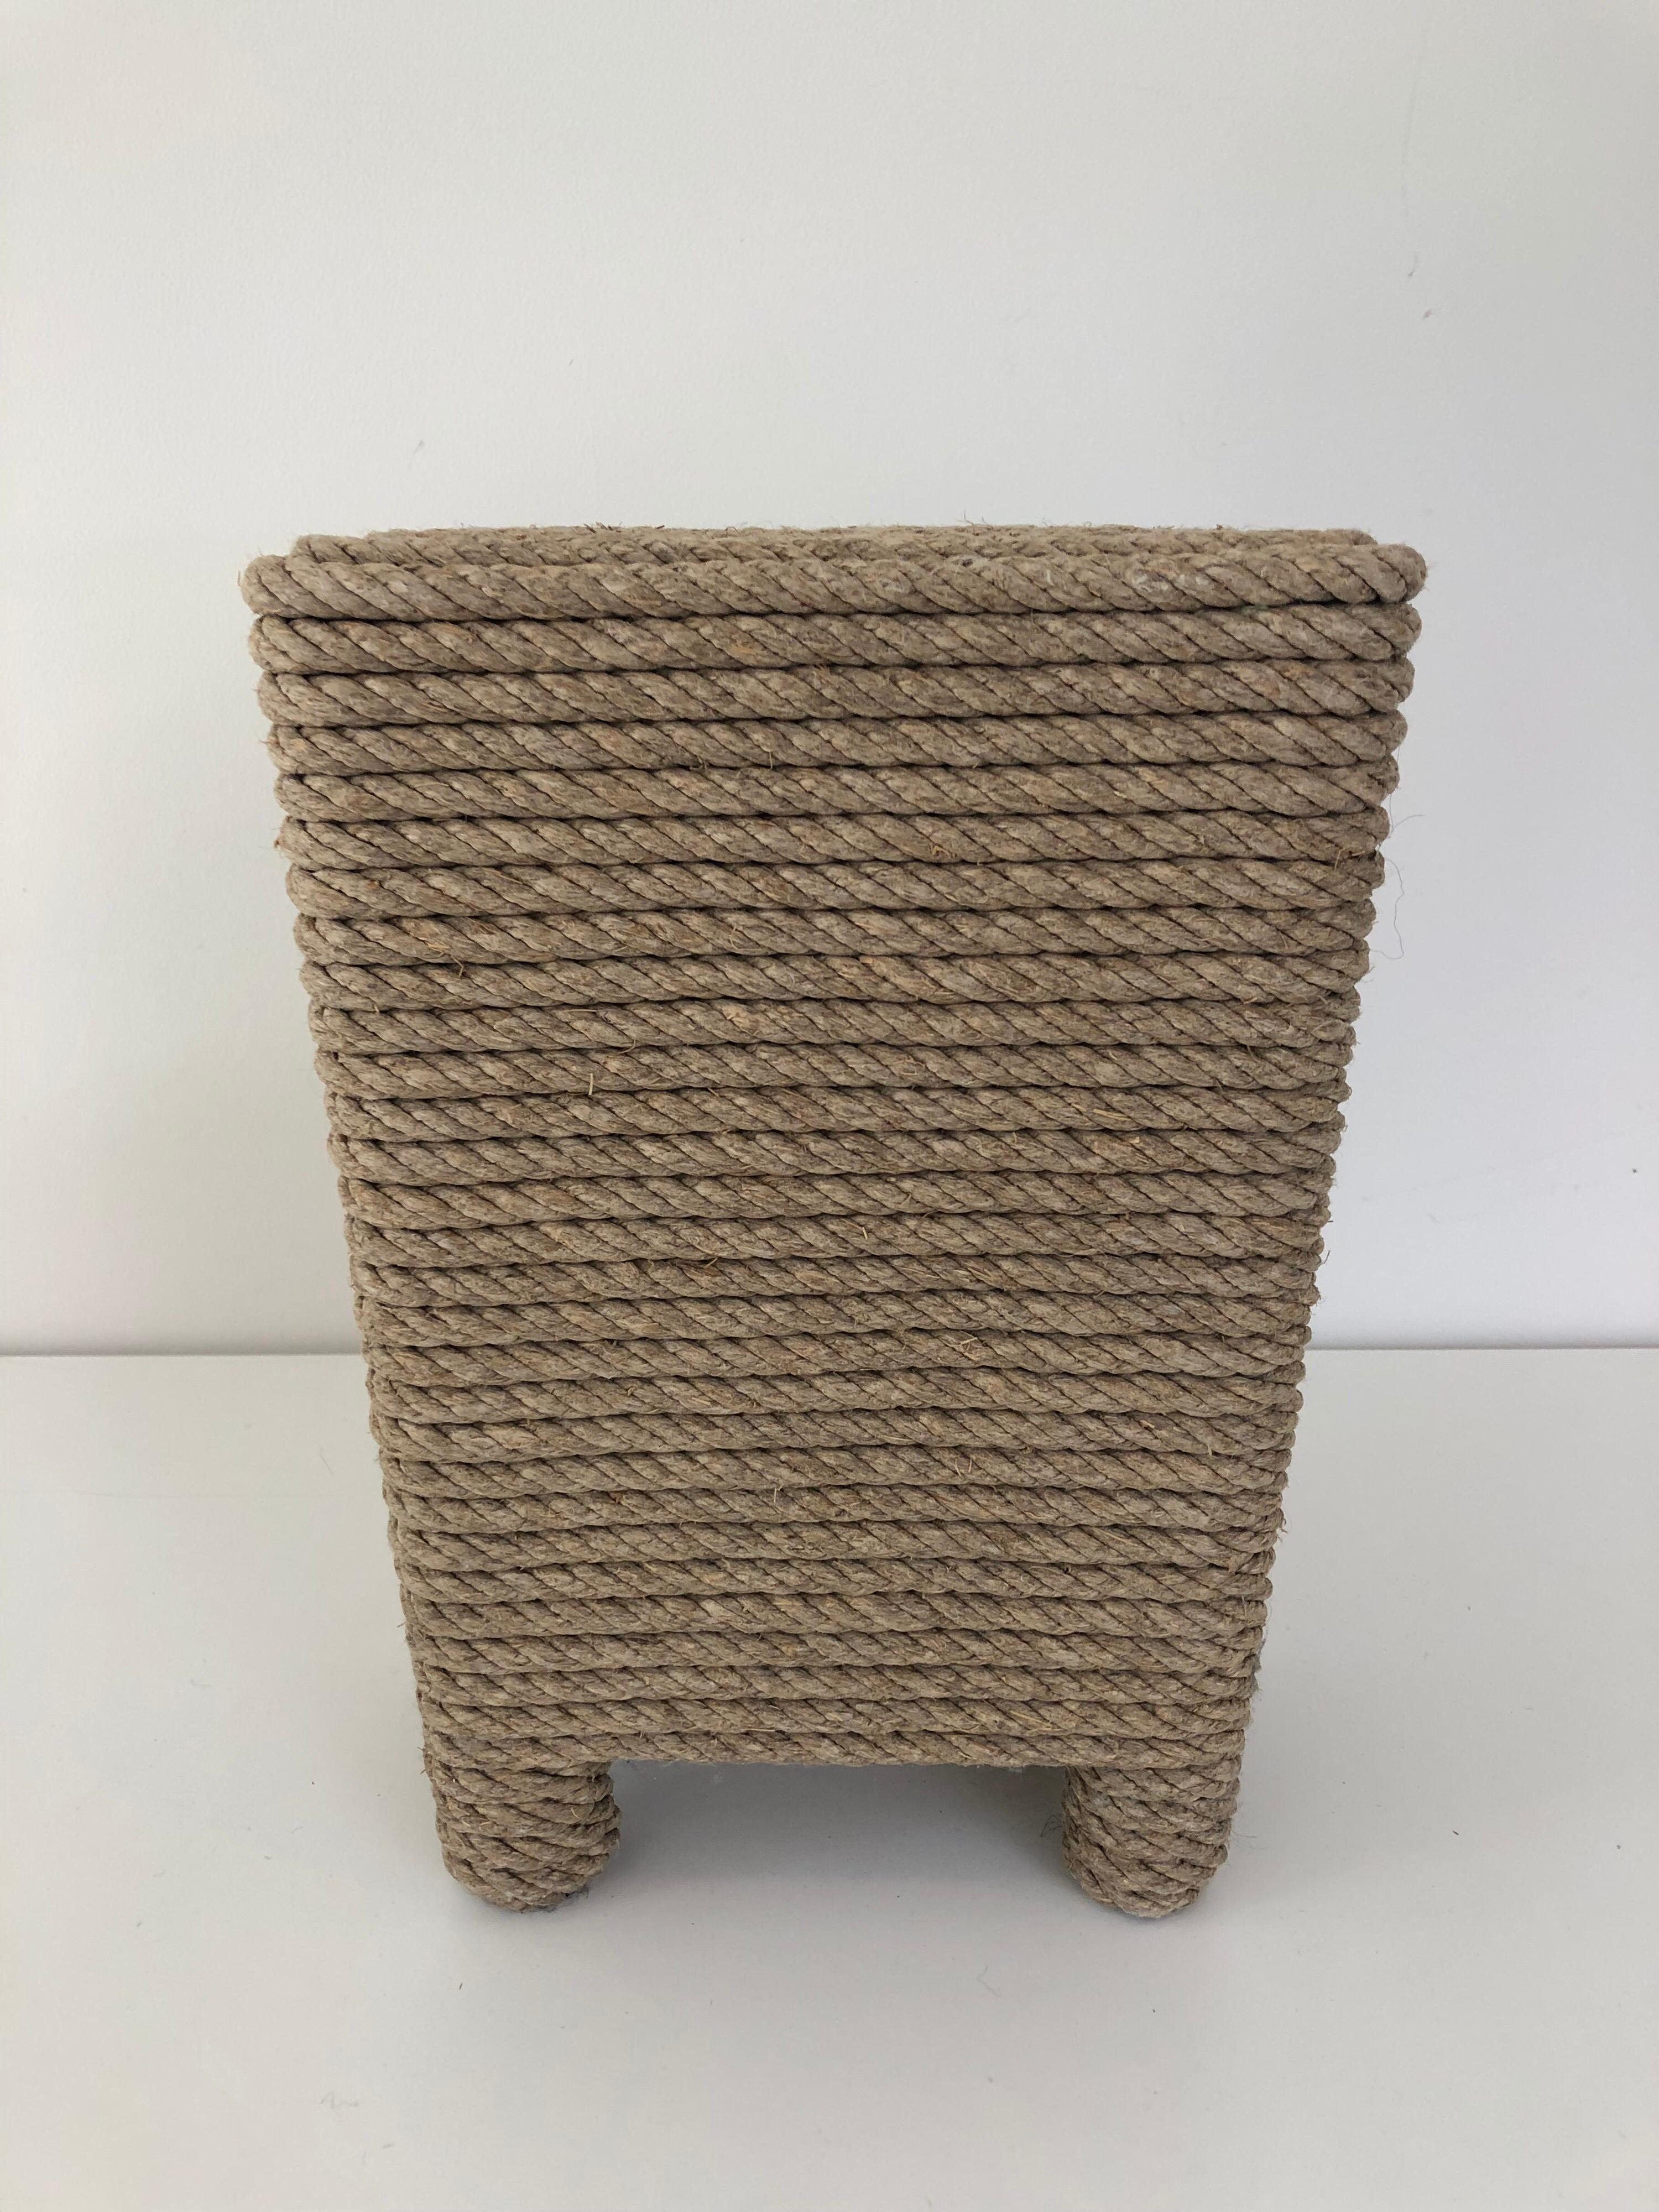 A miniature tabouret louxac hemp stool by Christian Astuguevieille. Christian Astuguevieille, a visionary French furniture artisan who, in 1989, found instant acclaim after his debut exhibition at Paris’s Galerie Yves Gastou. His signature